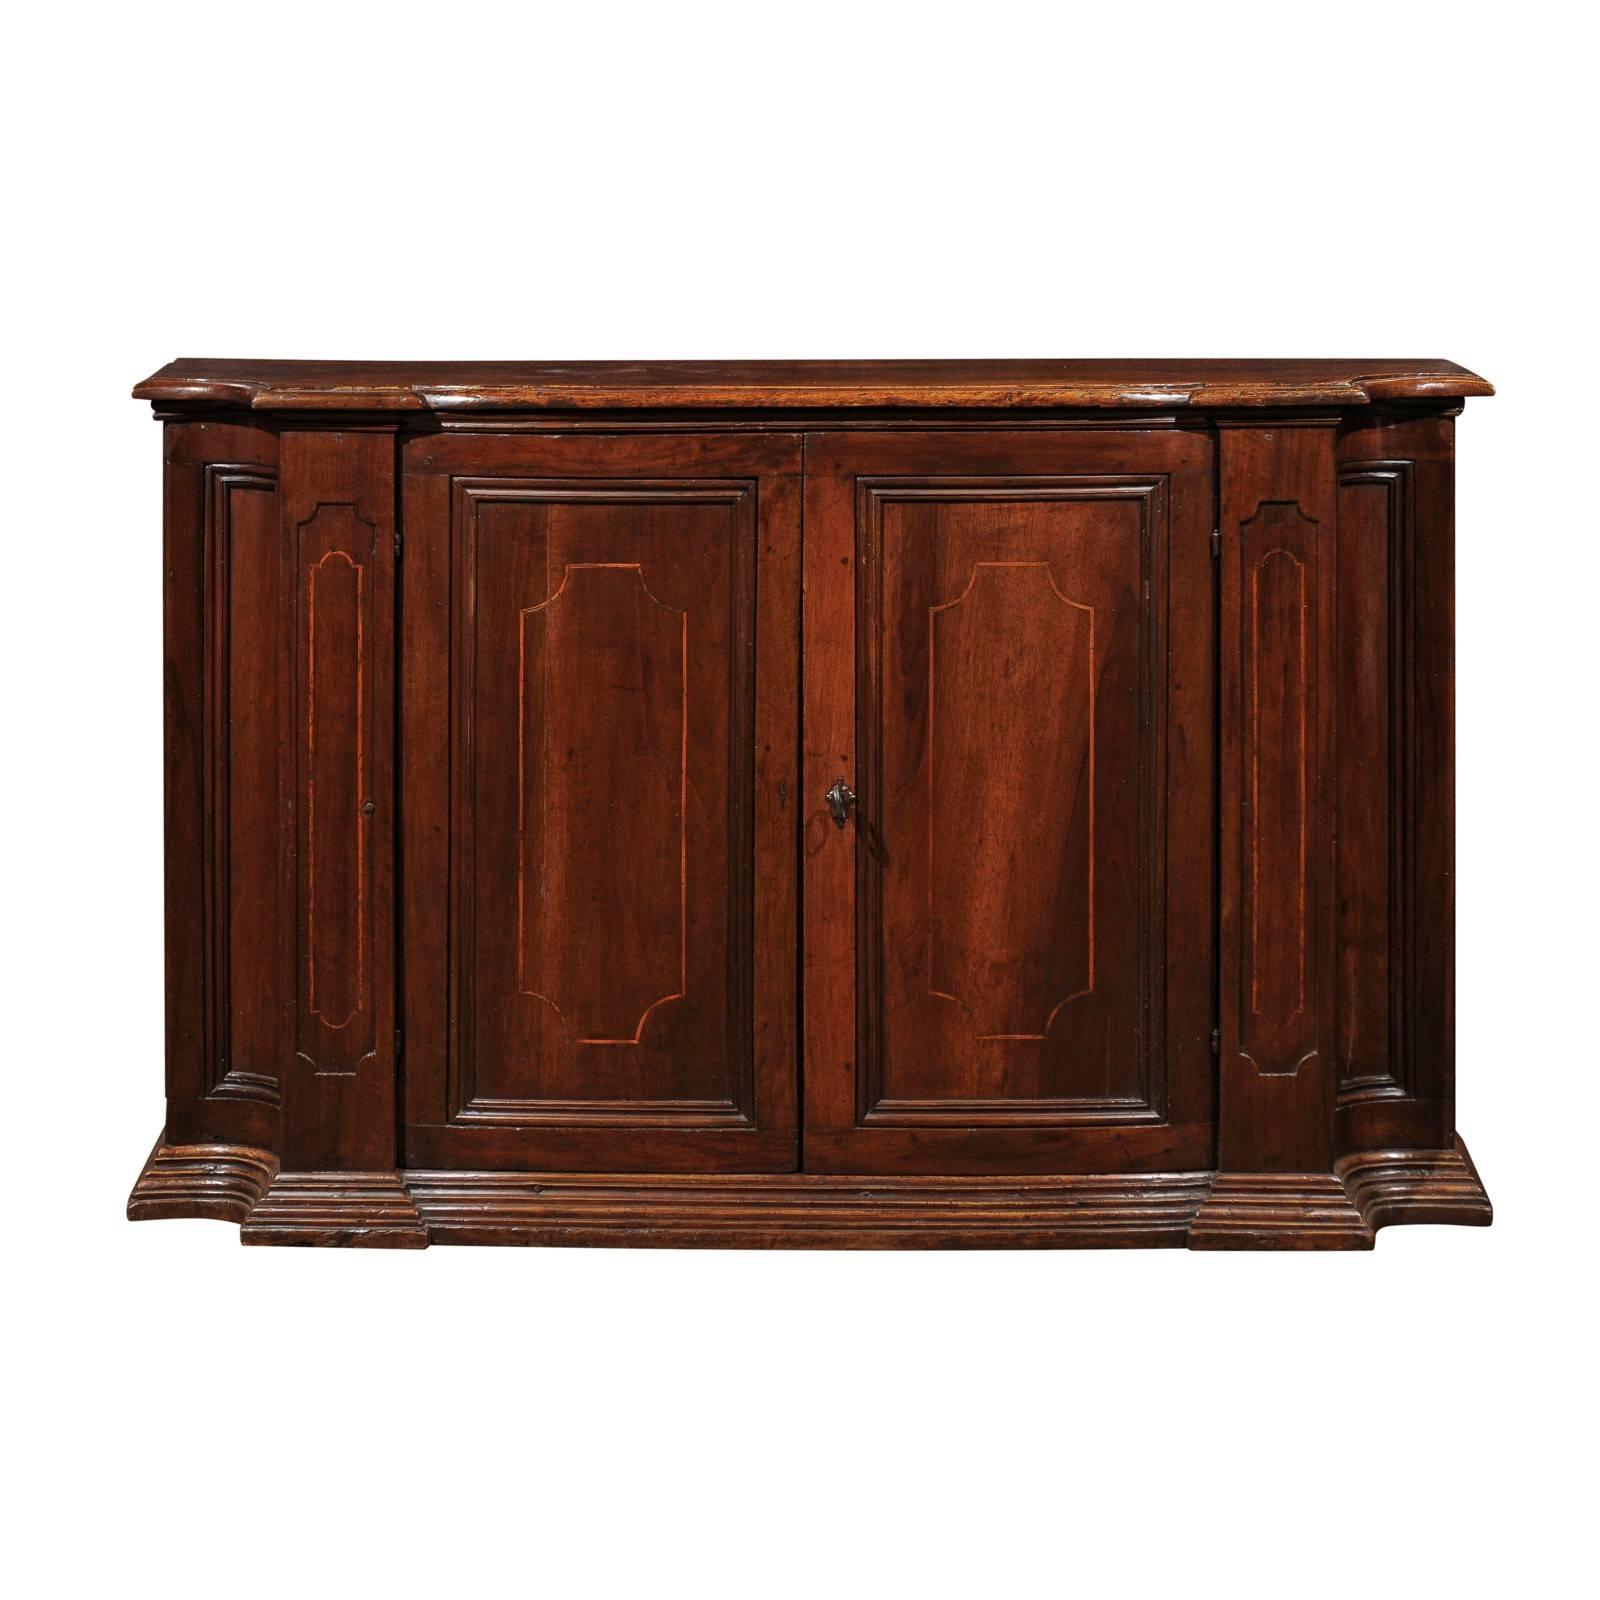 Italian 1880s Mahogany Buffet with Banded Inlay, Curved Sides and Molded Plinth